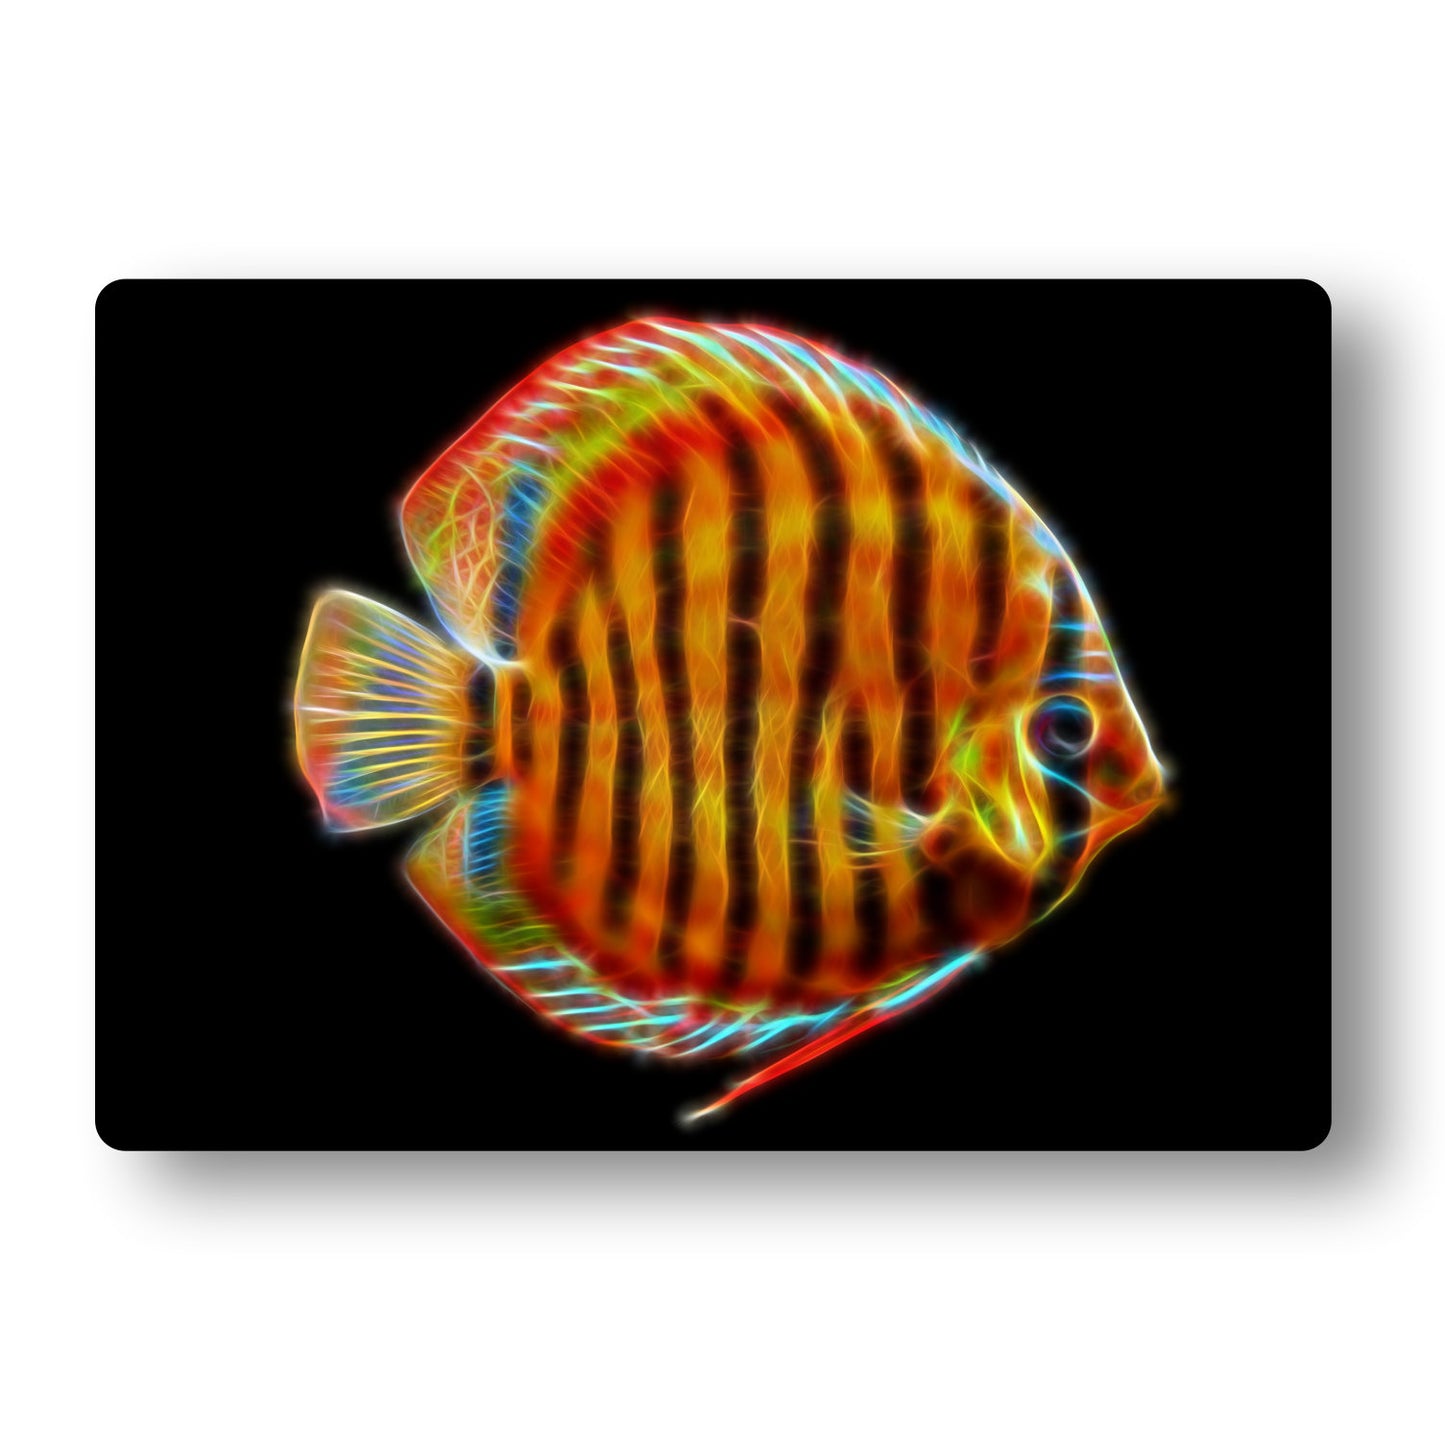 Discus Fish Metal Wall Plaque with Stunning Fractal Art Designs